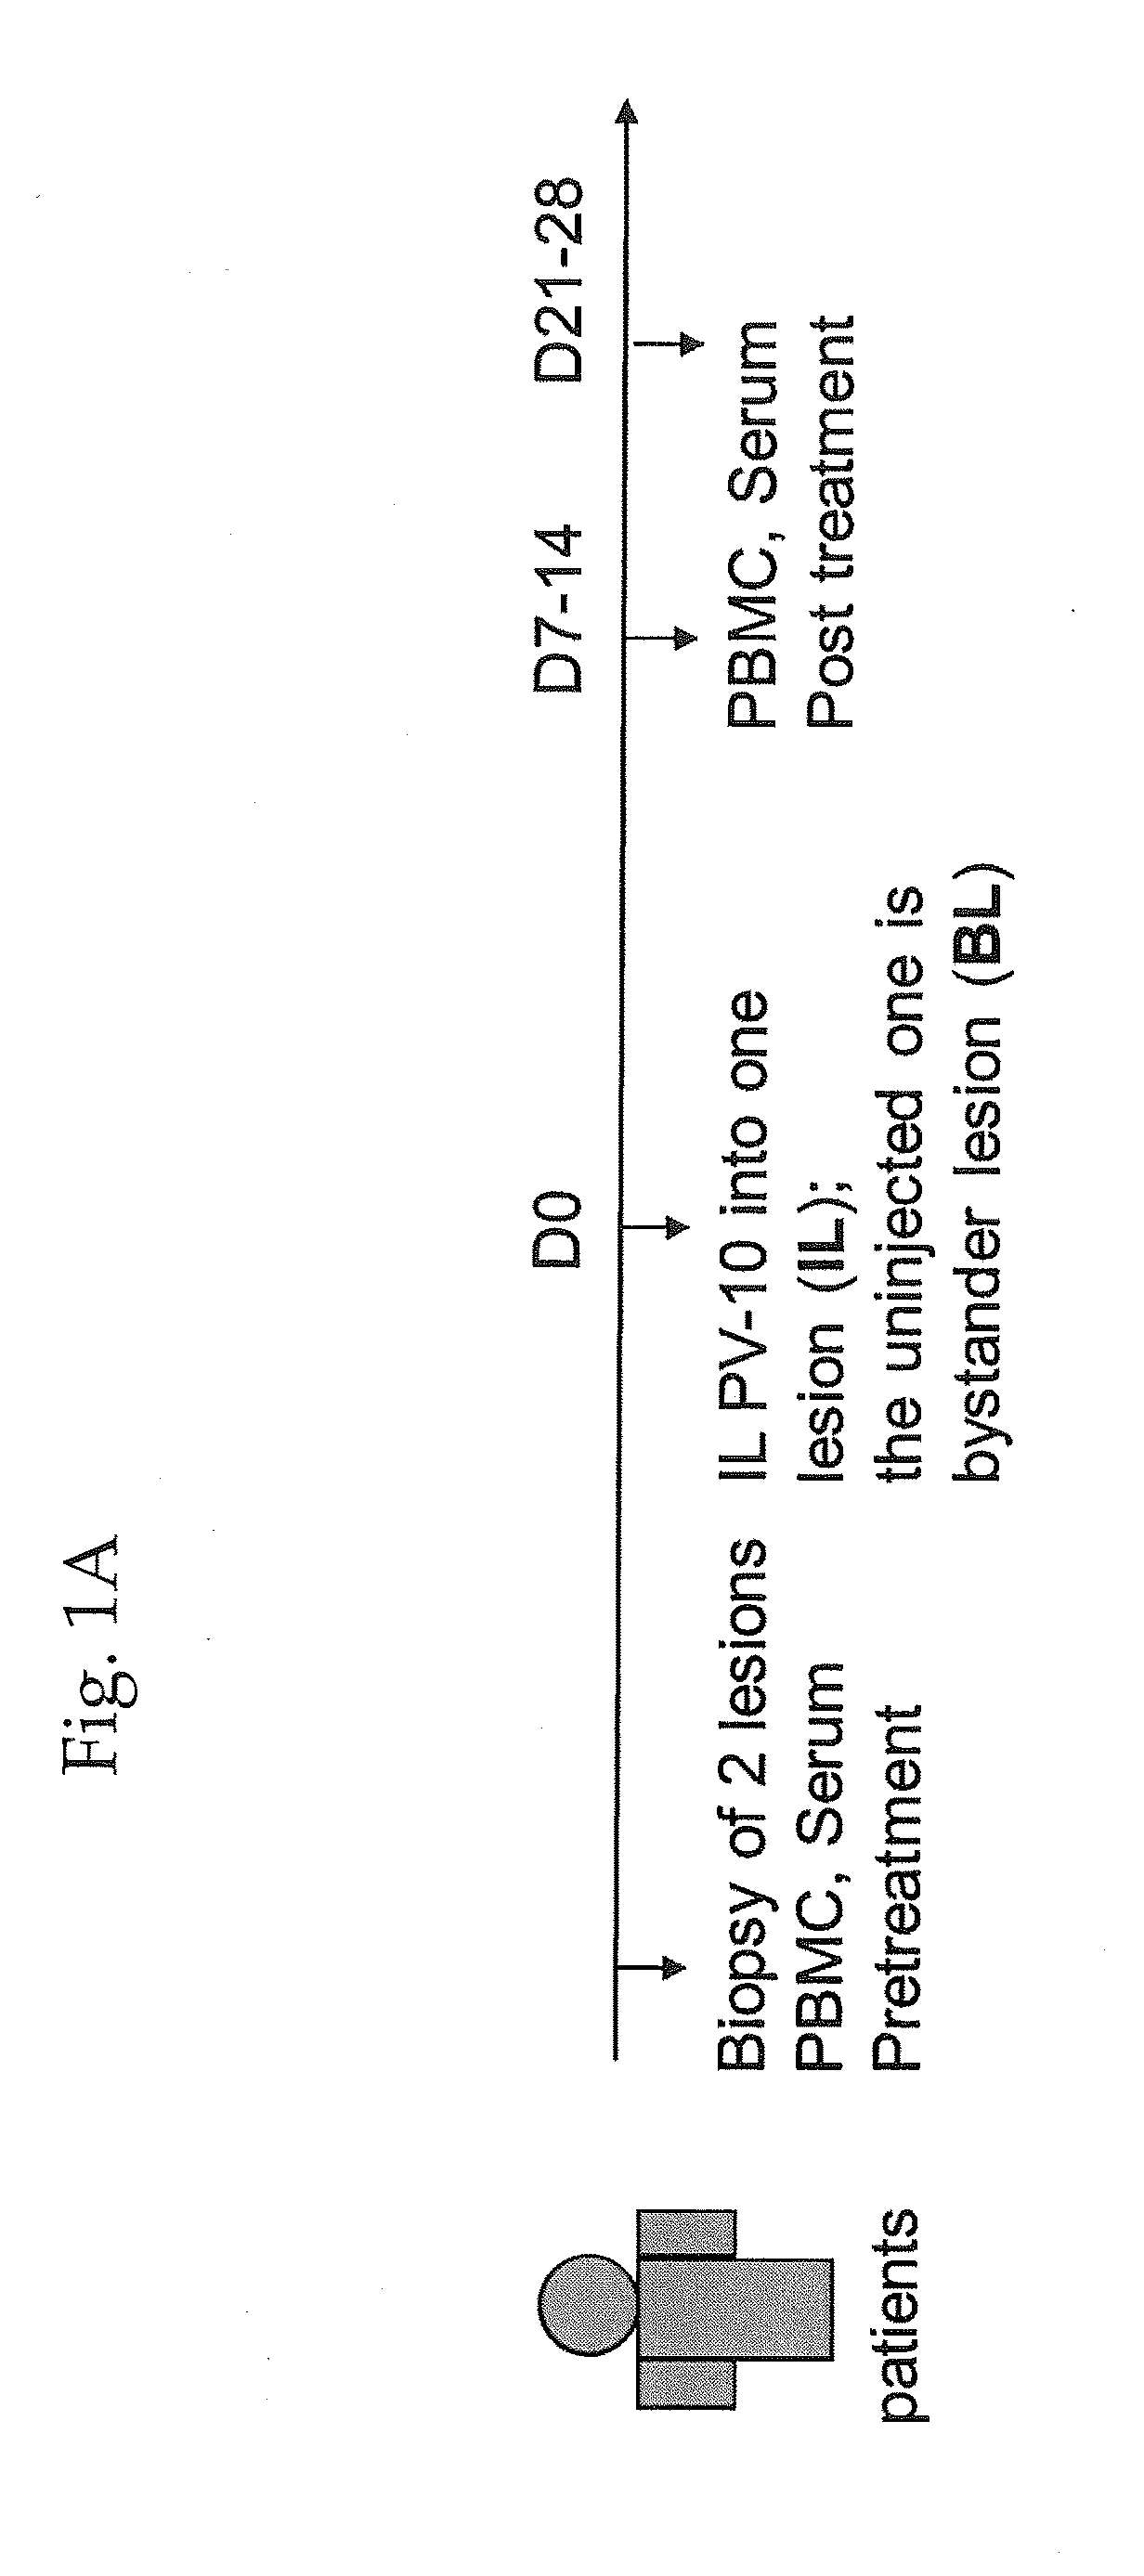 Method of Ex Vivo Enhancement of Immune Cell Activity for Cancer Immunotherapy with a Small Molecule Ablative Compound